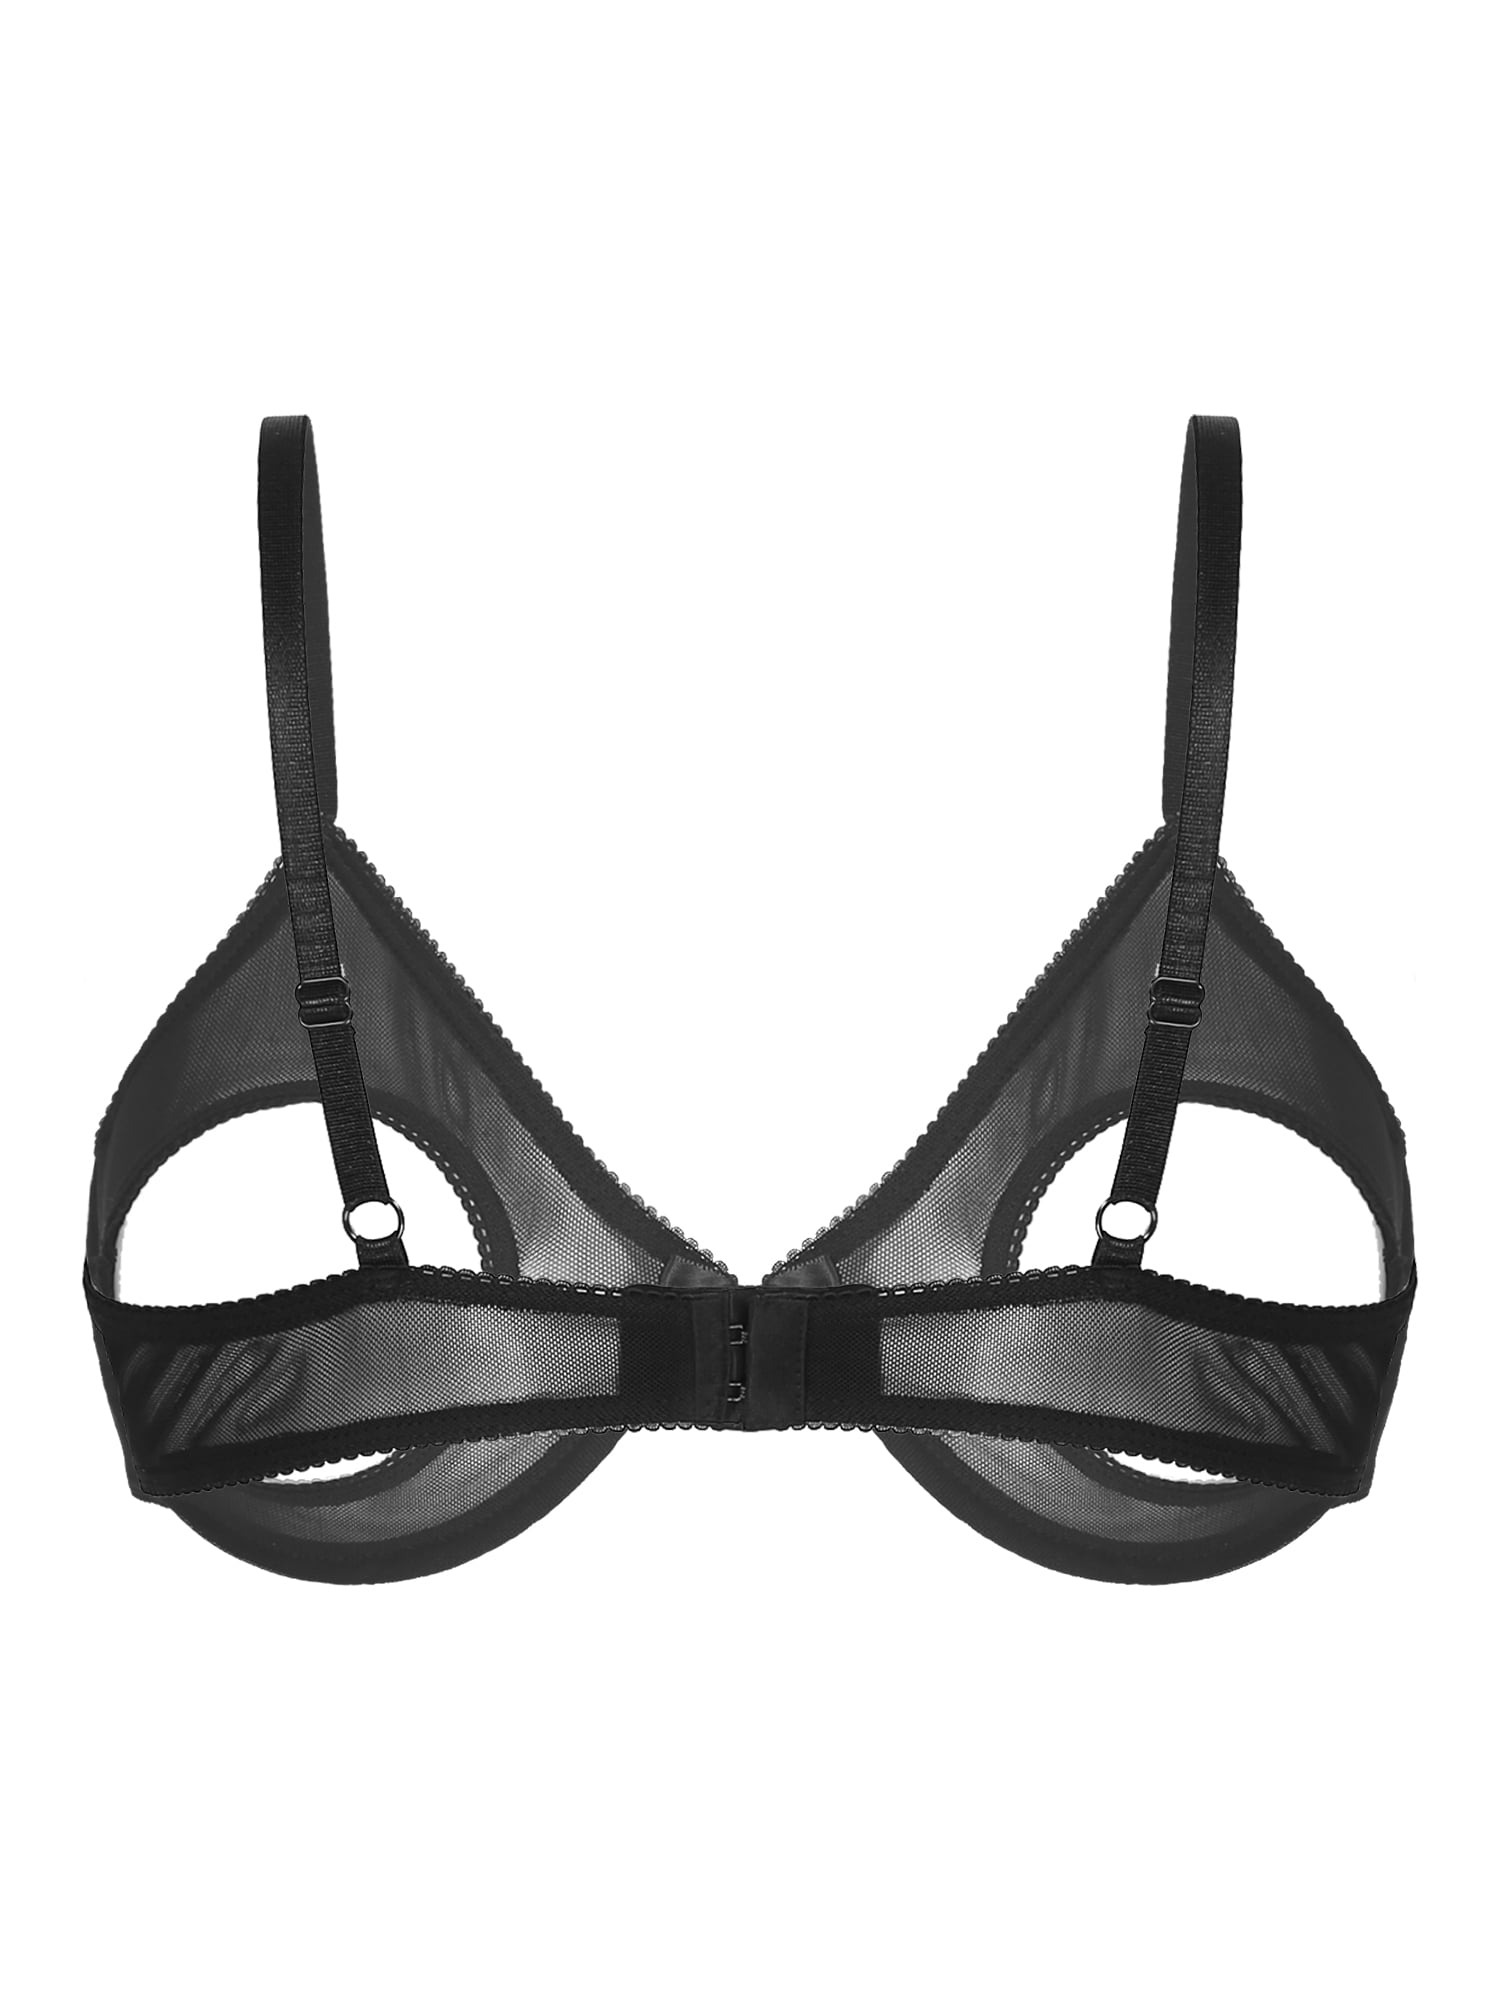  YiZYiF Women's Sexy Sheer Bra See-Through Mesh Lingerie Low-Cut  Unlined Everyday Bra Spaghetti Straps Black Small: Clothing, Shoes & Jewelry